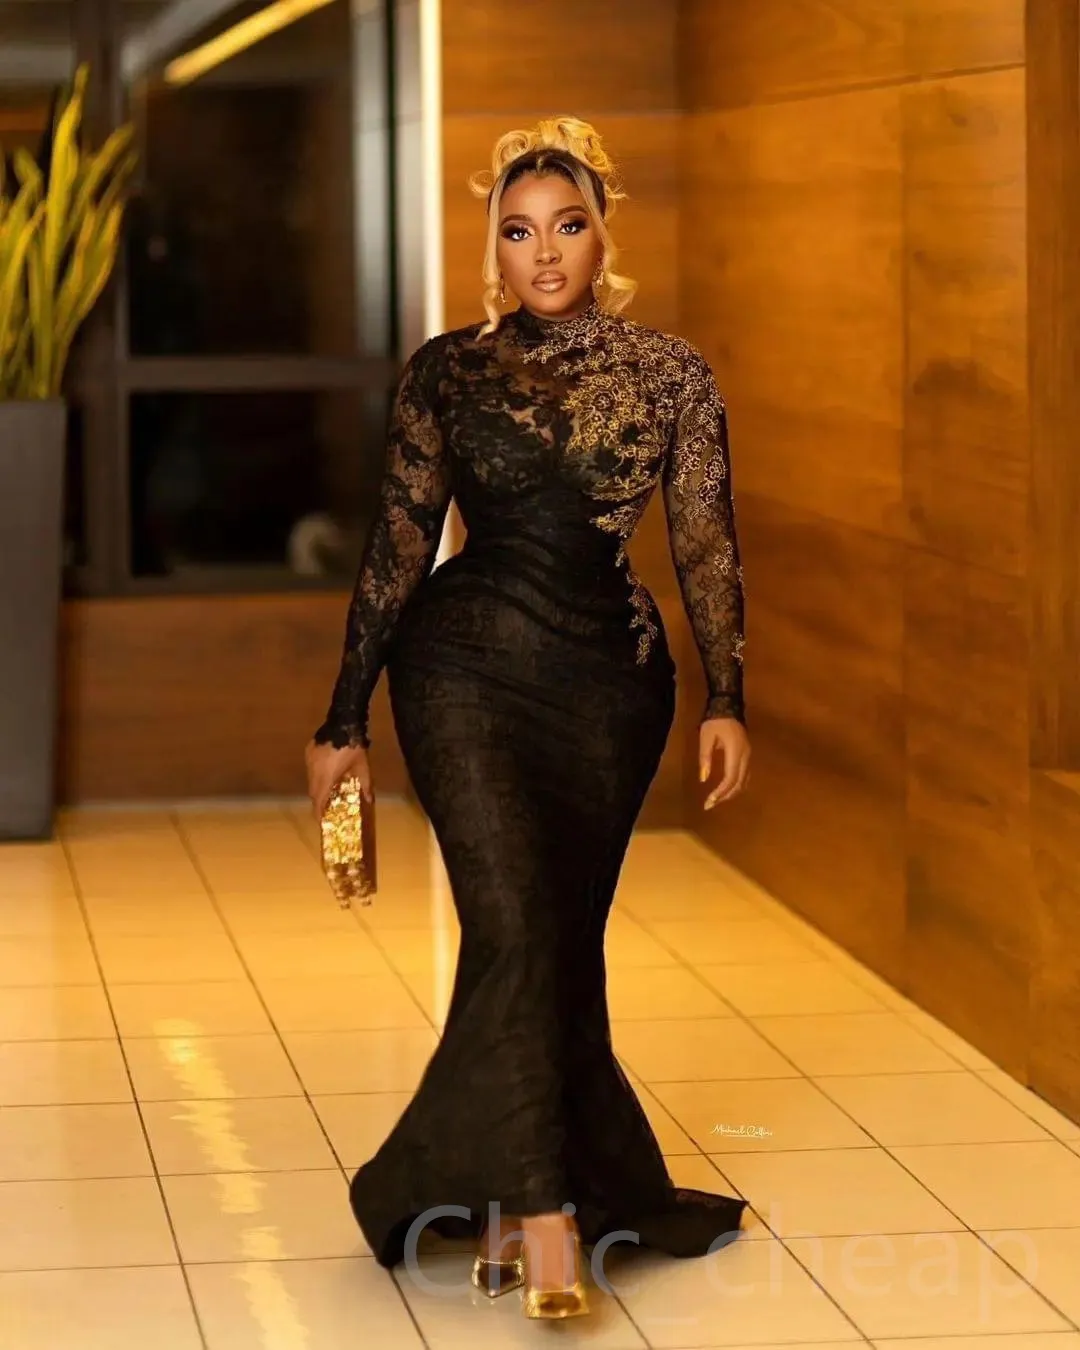 2023 May Aso Ebi Black Mermaid Prom Dress Lace Sexy Evening Formal Party Second Reception Birthday Engagement Gowns Dress Robe De Soiree ZJ194